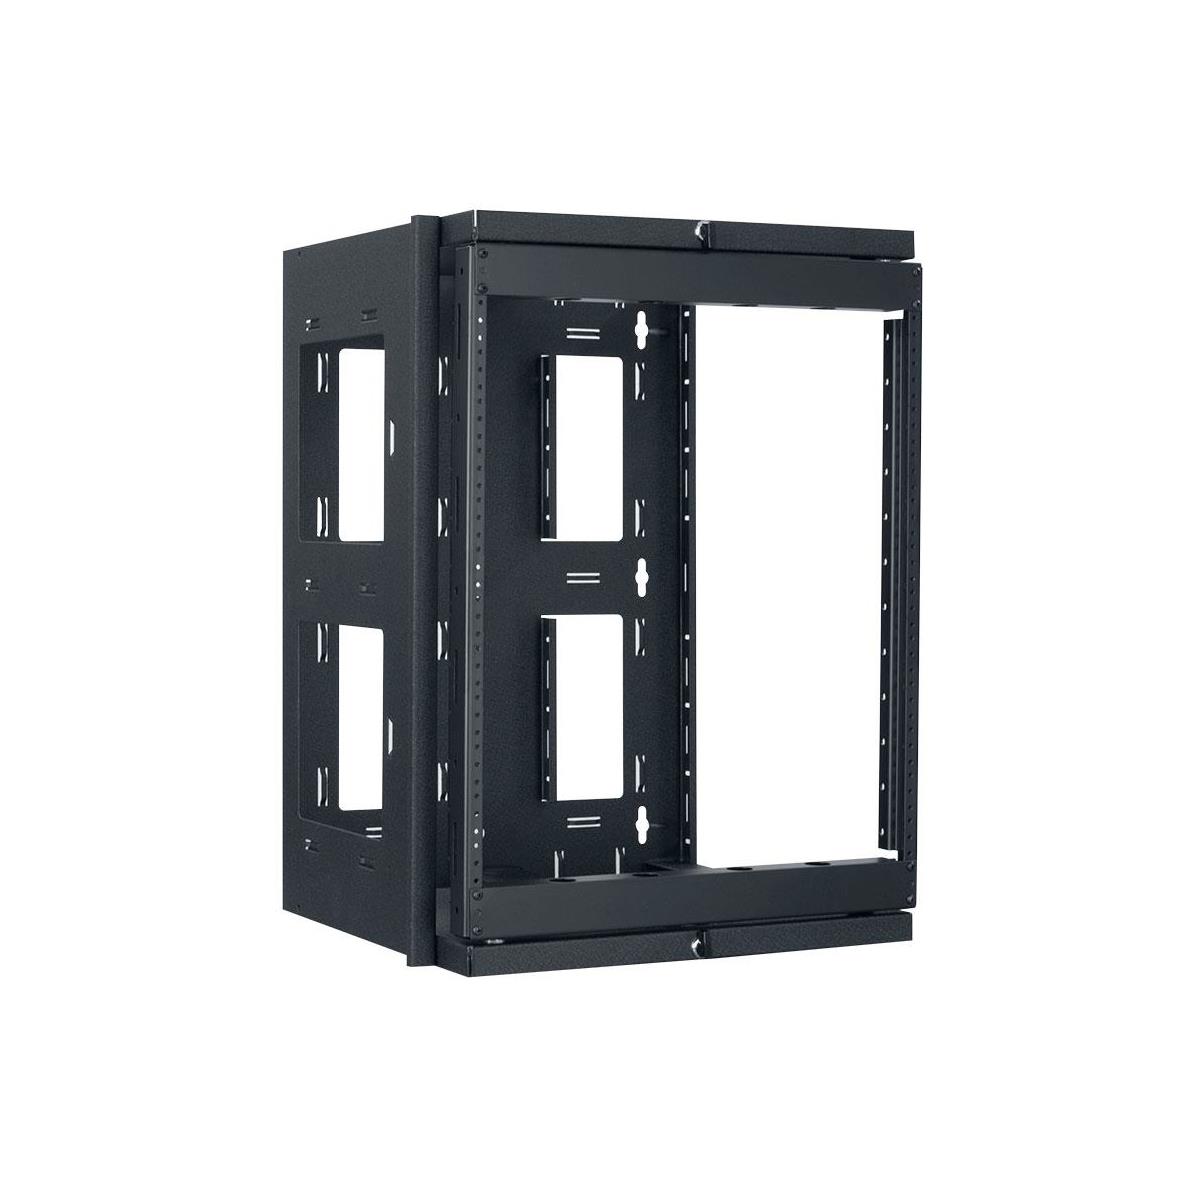 Image of Lowell Manufacturing SGR-1218 12U Swing-Gate Open Frame Rack